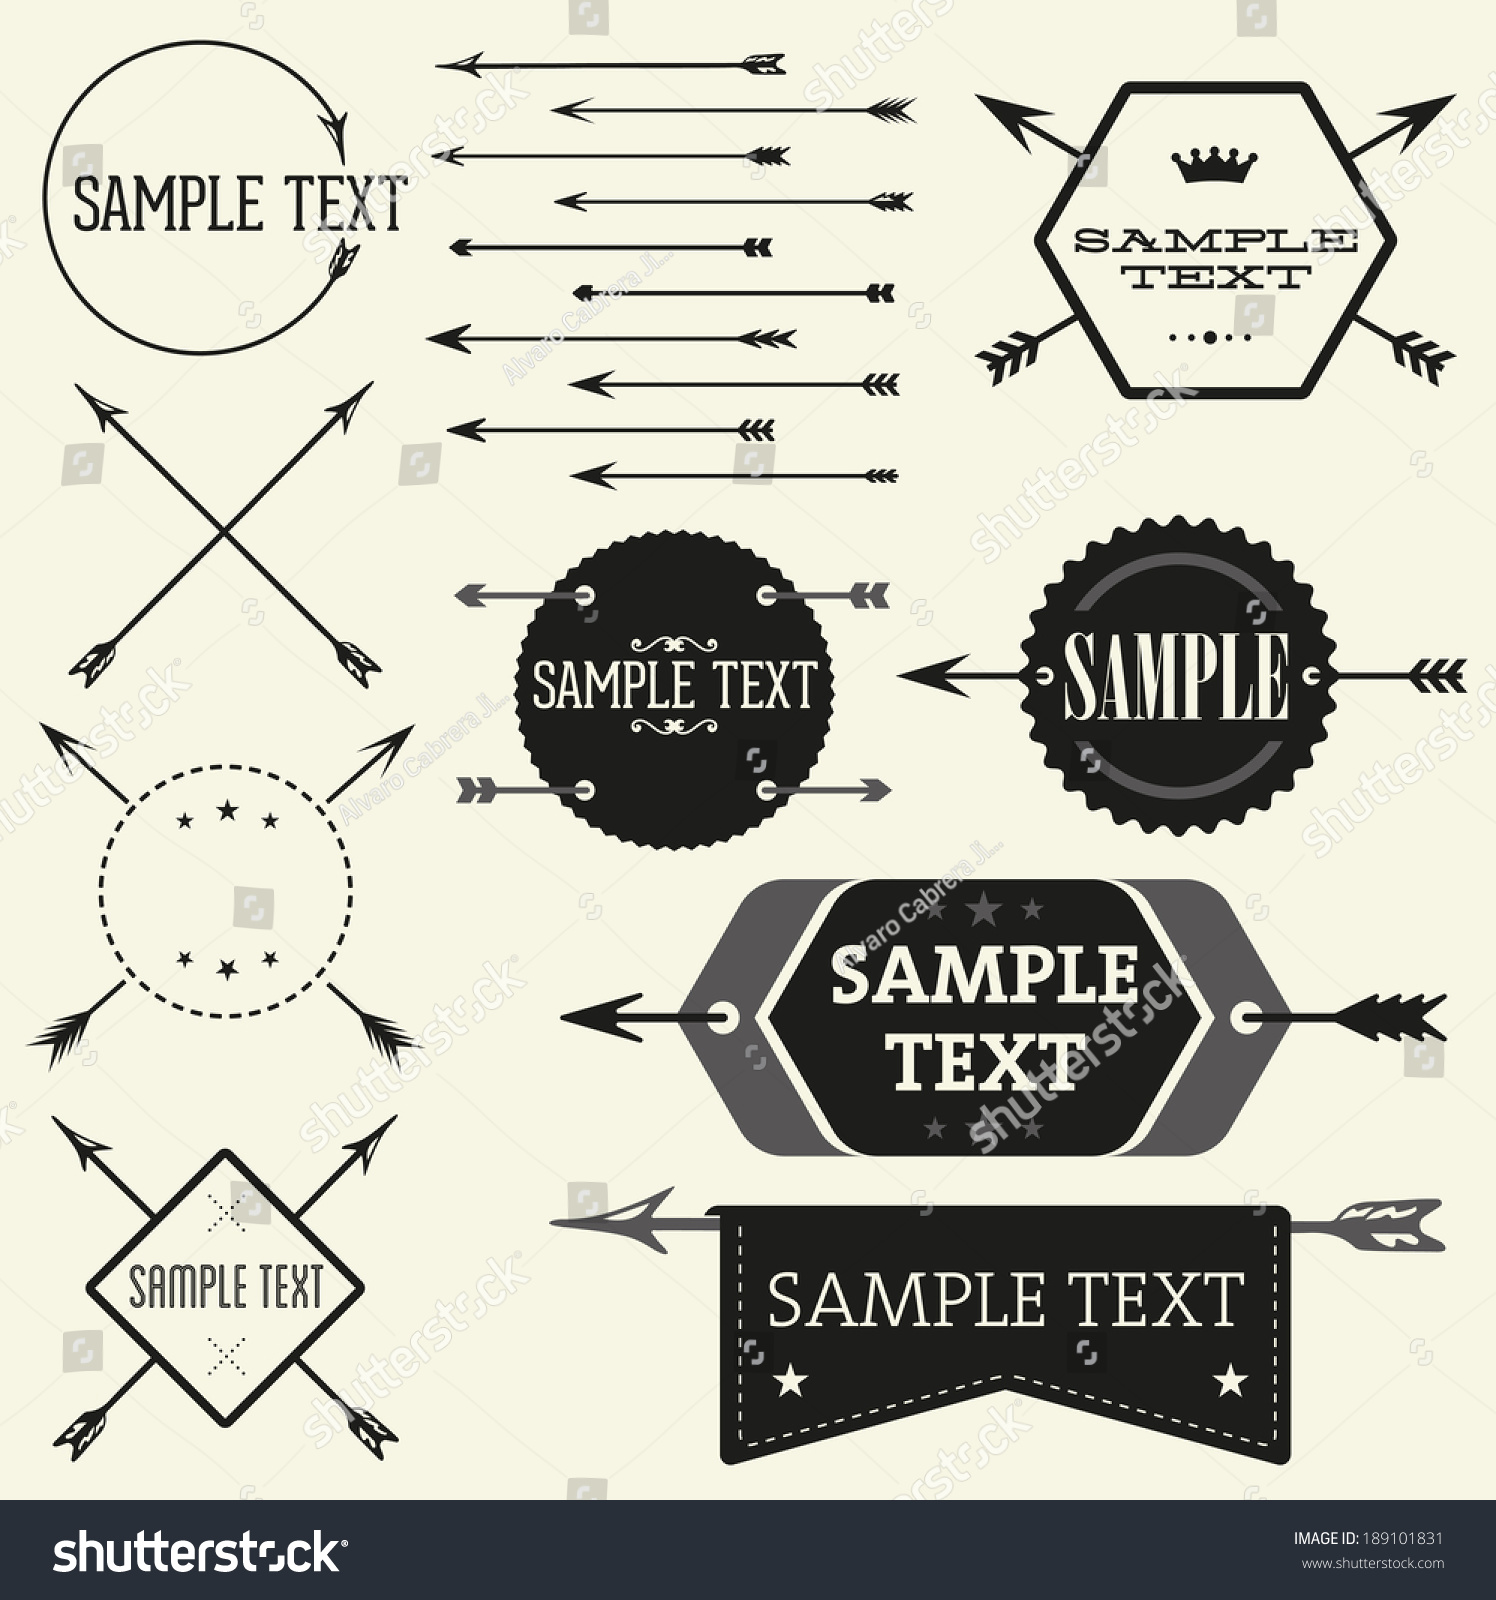 Vector vintage badge and label templates. Great for retro designs #189101831